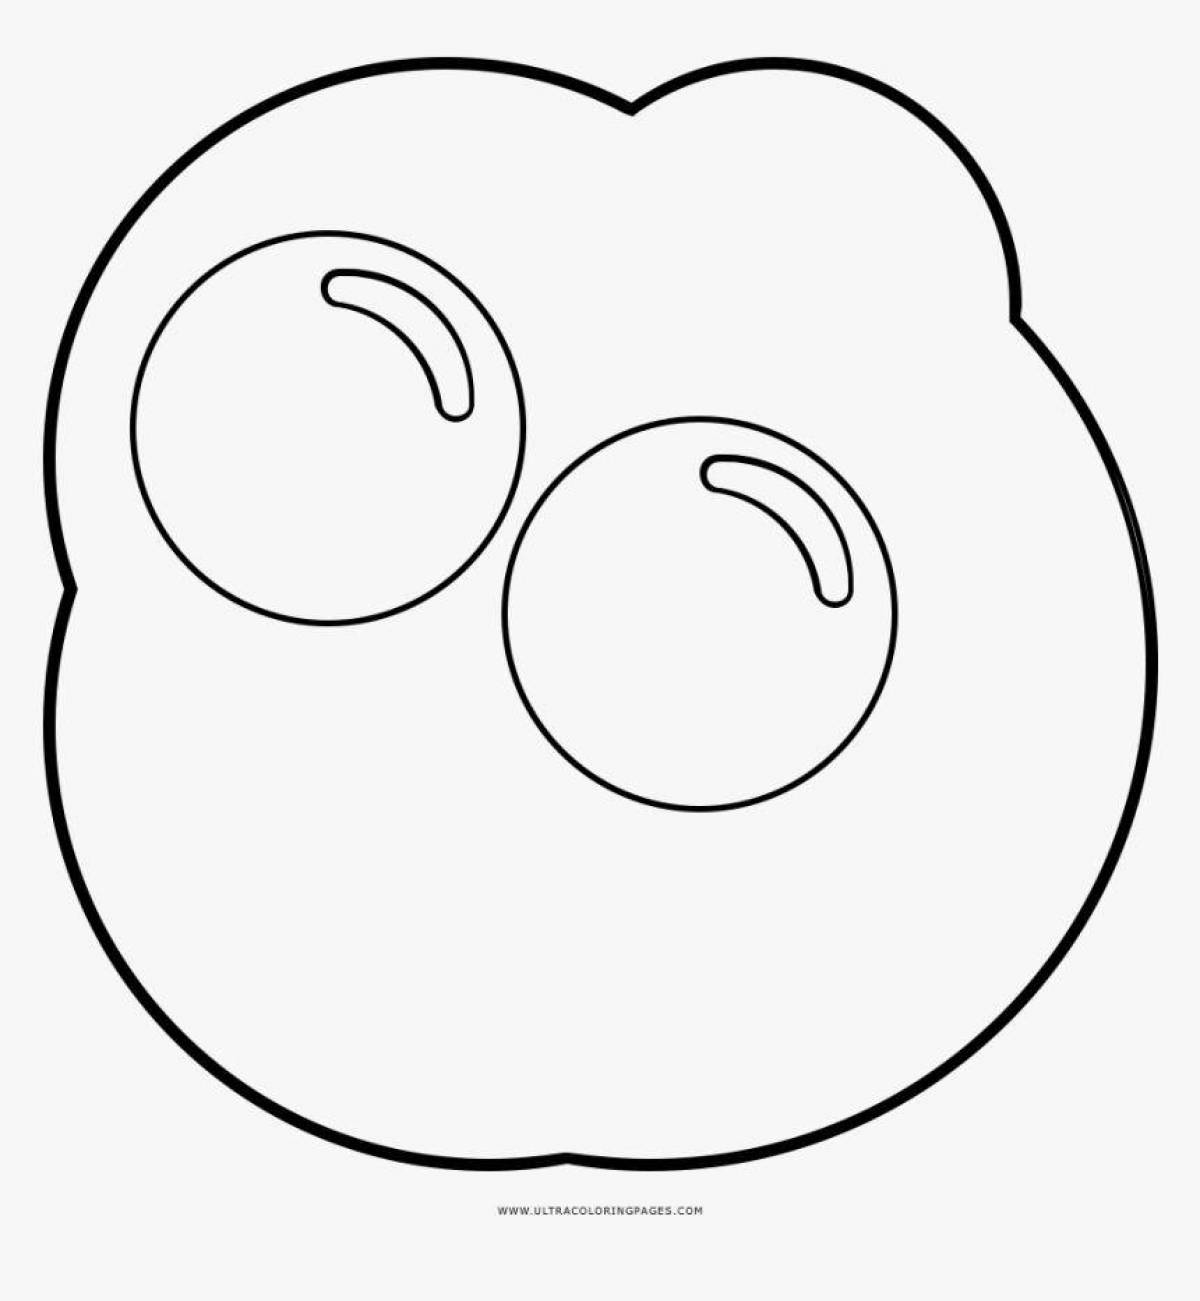 Fried egg coloring page